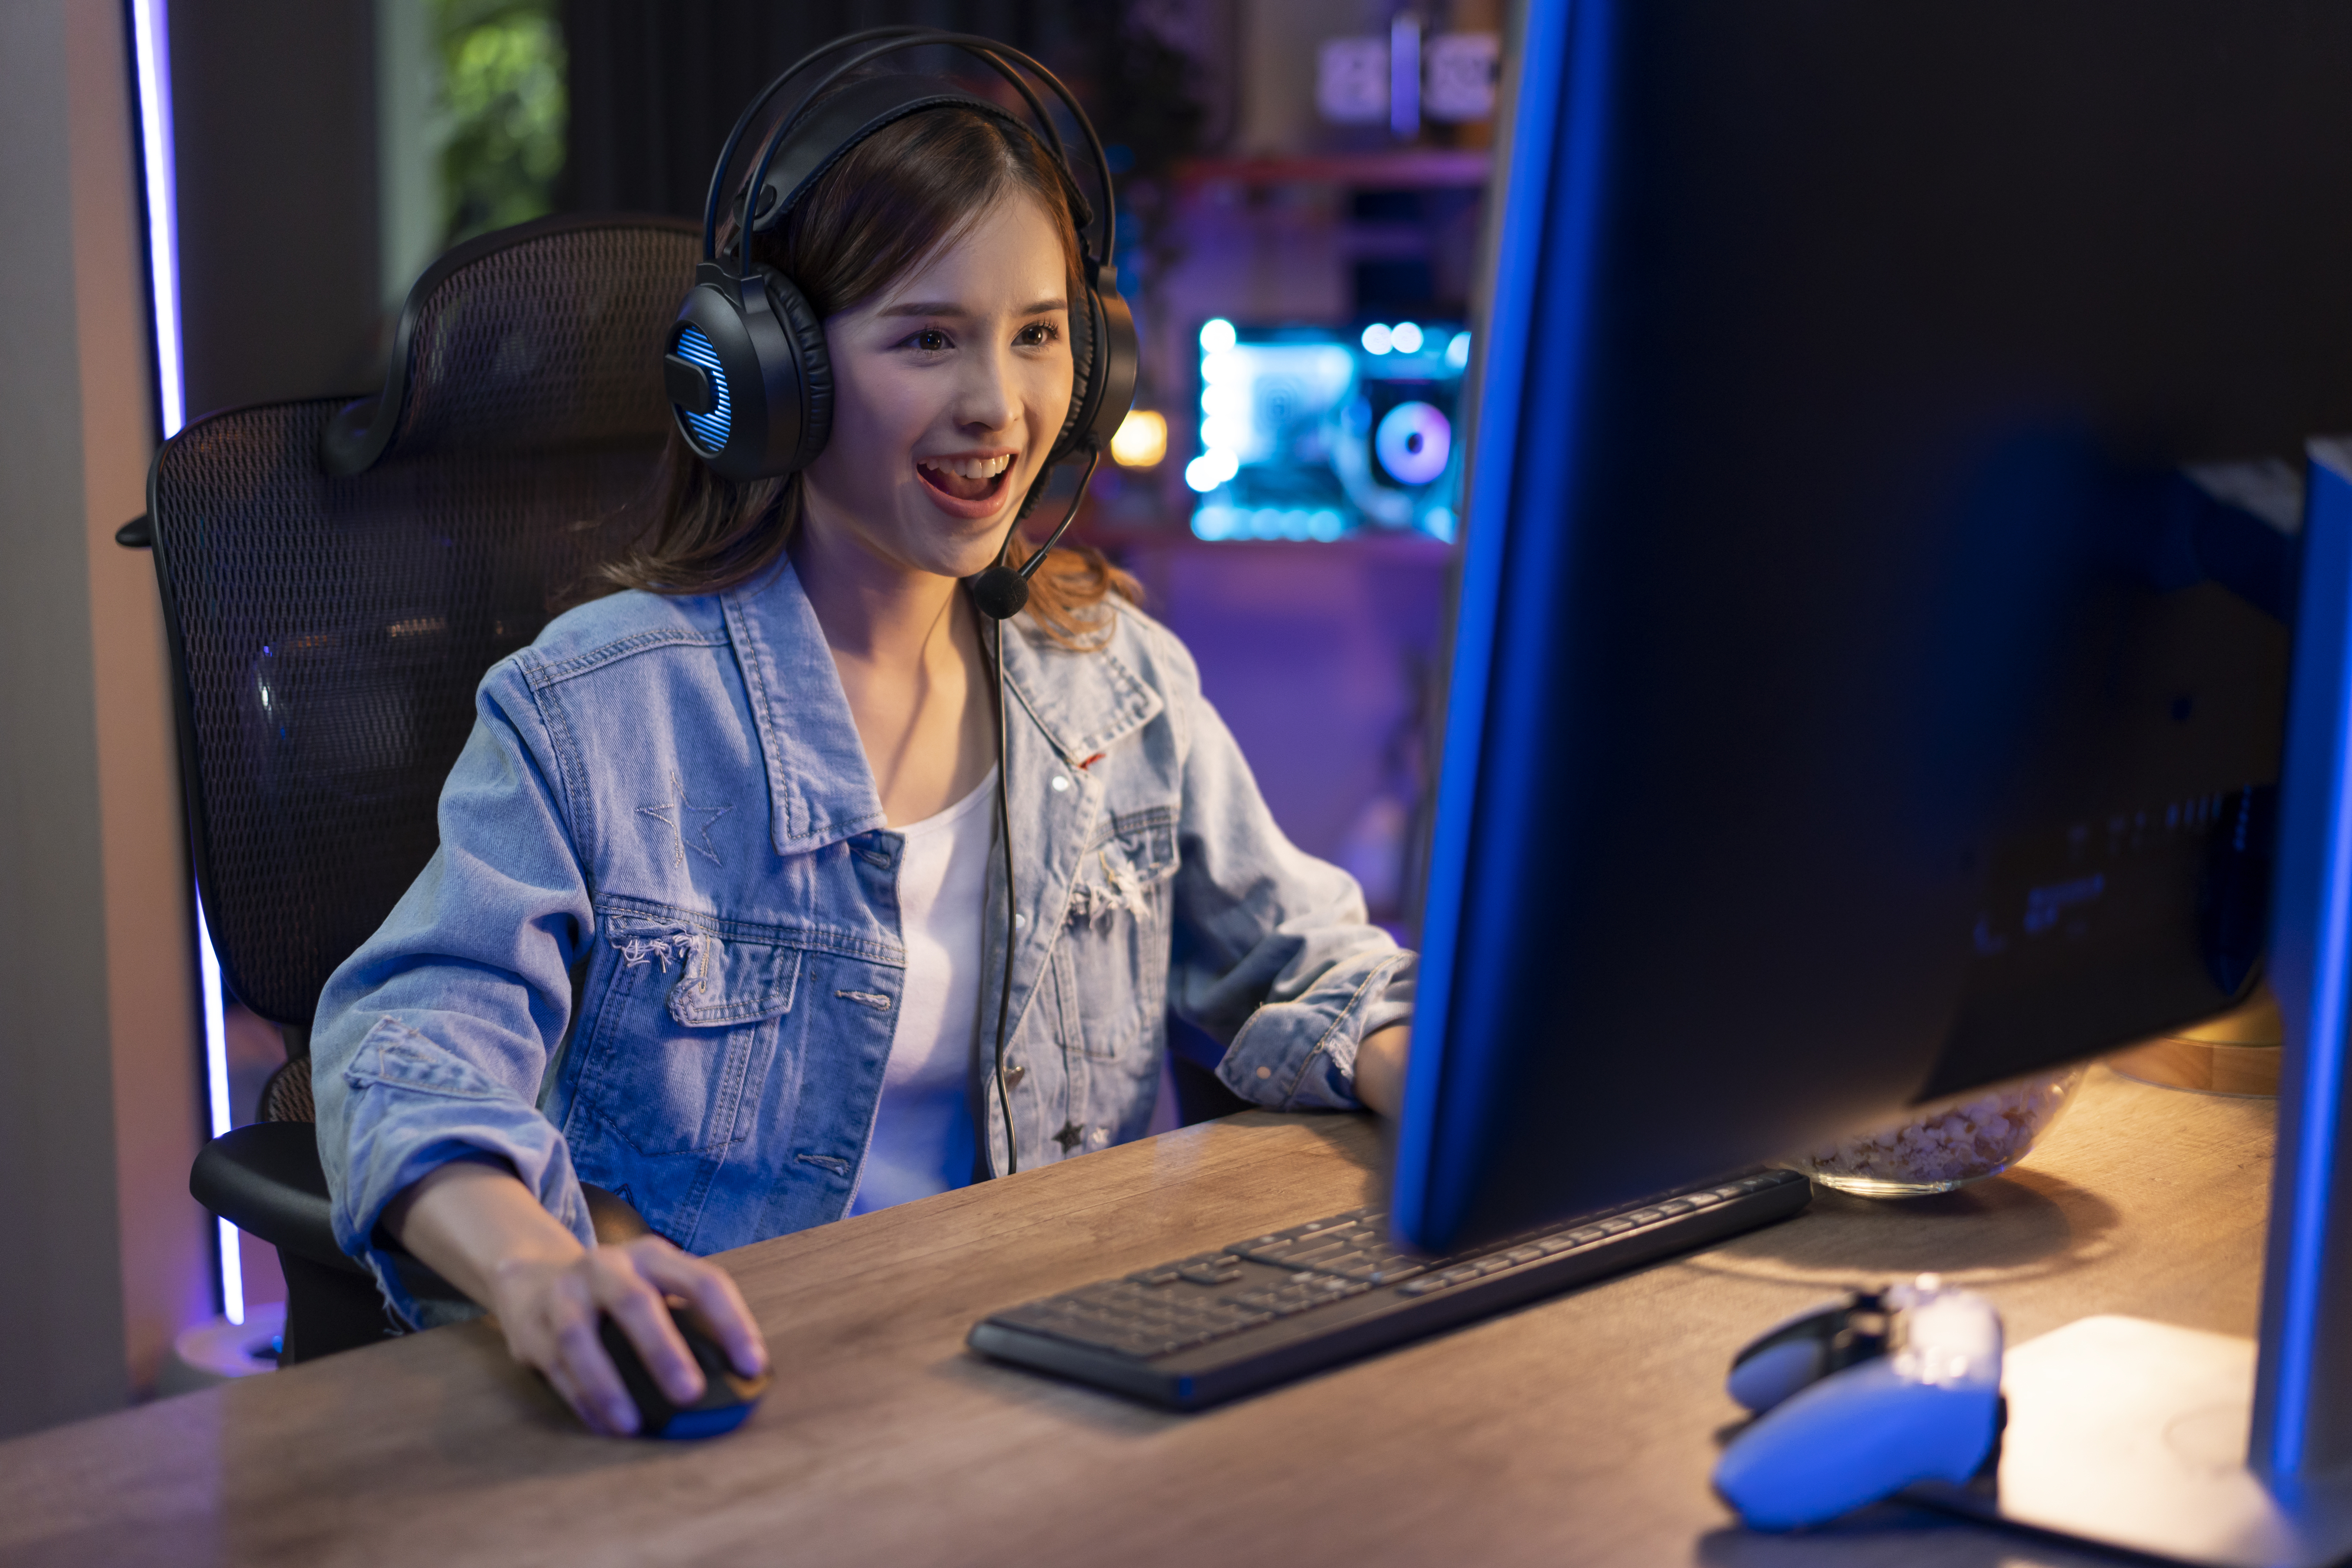 Woman in headset at computer desk with screen, smiling, possibly engaging in remote work or gaming